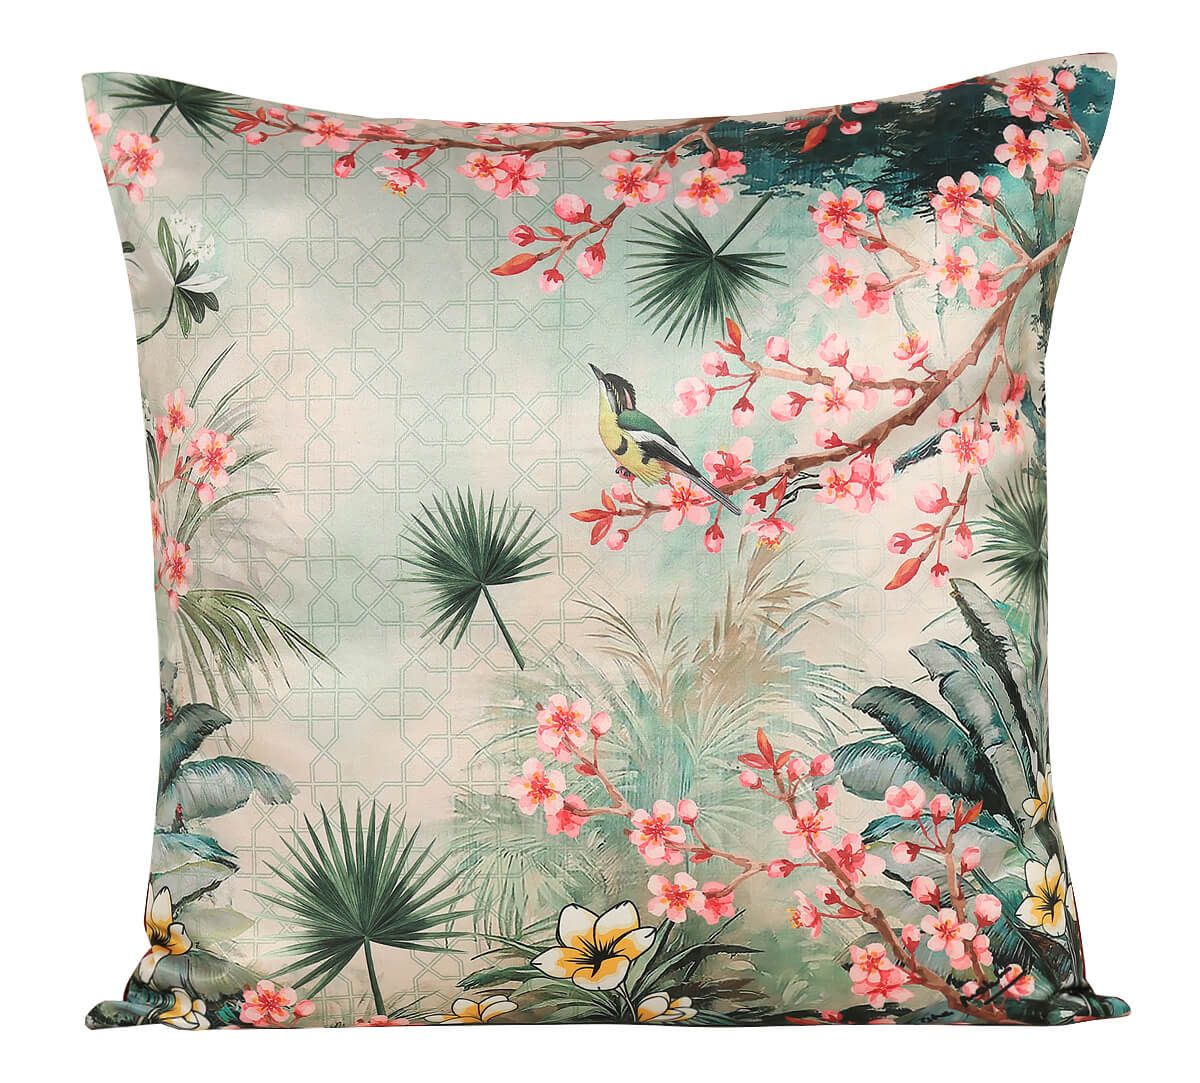 Inflorescence Frolic Satin Blend Cushion Cover Set of 5